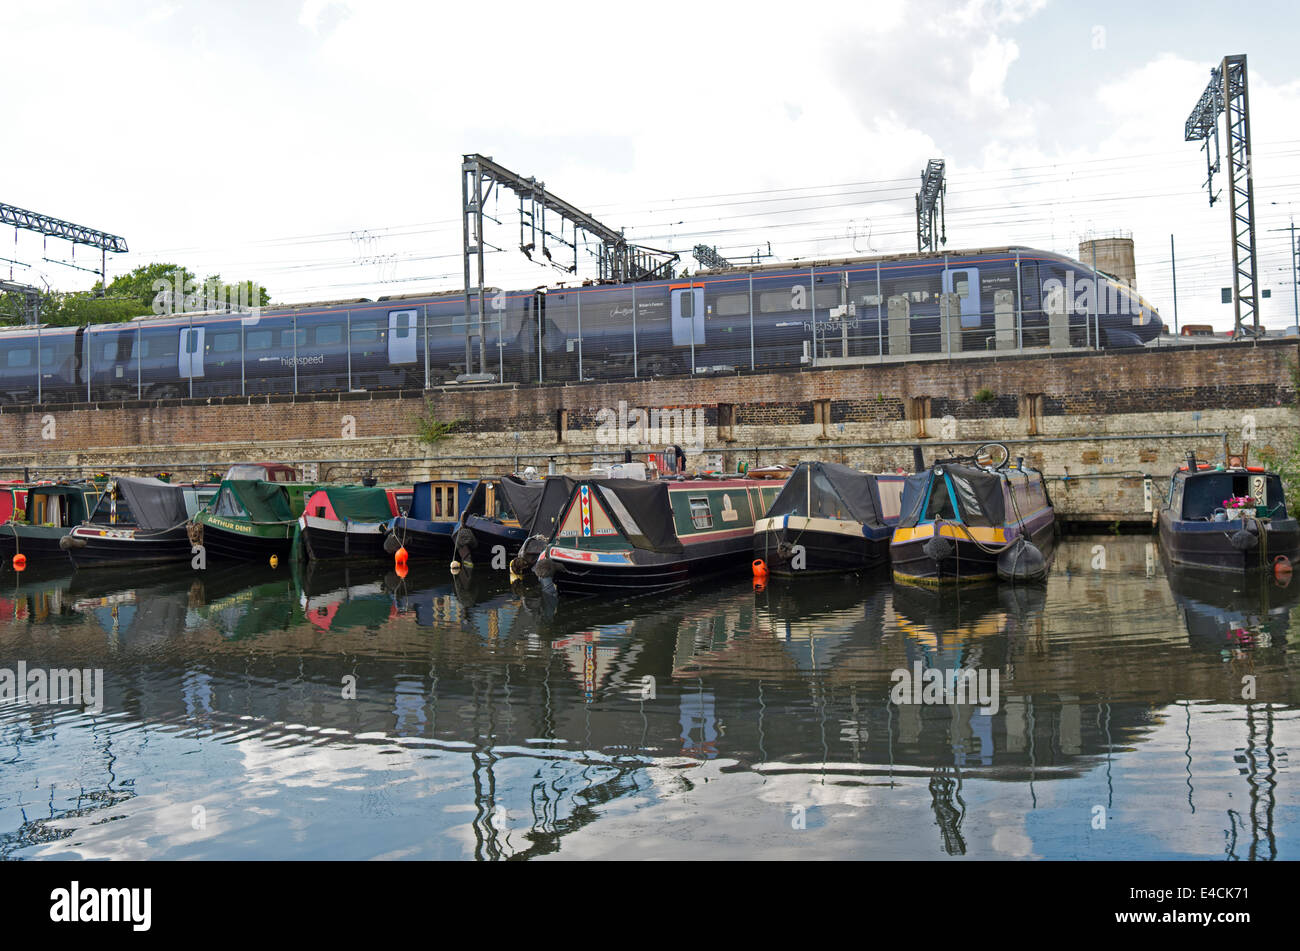 A Eurostar train passes alongside canal boats moored in the Regent's Canal in King's Cross, London. Stock Photo